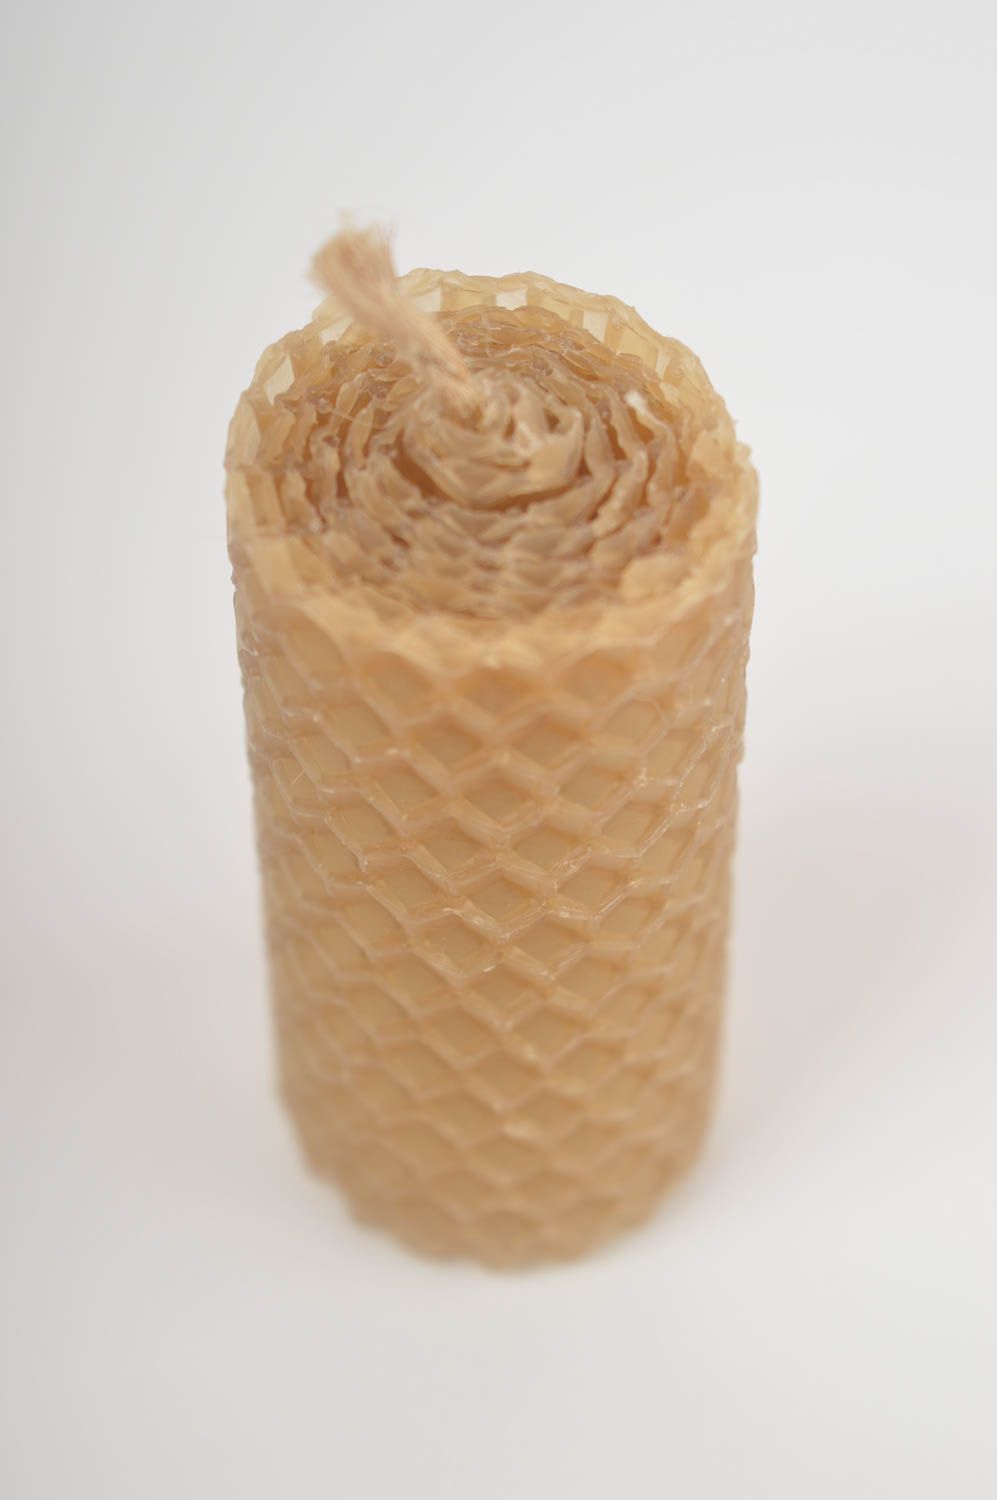 Natural bee wax 2 hour pillar candle for emergency preparedness 2,36 inches, 0,05 lb photo 4